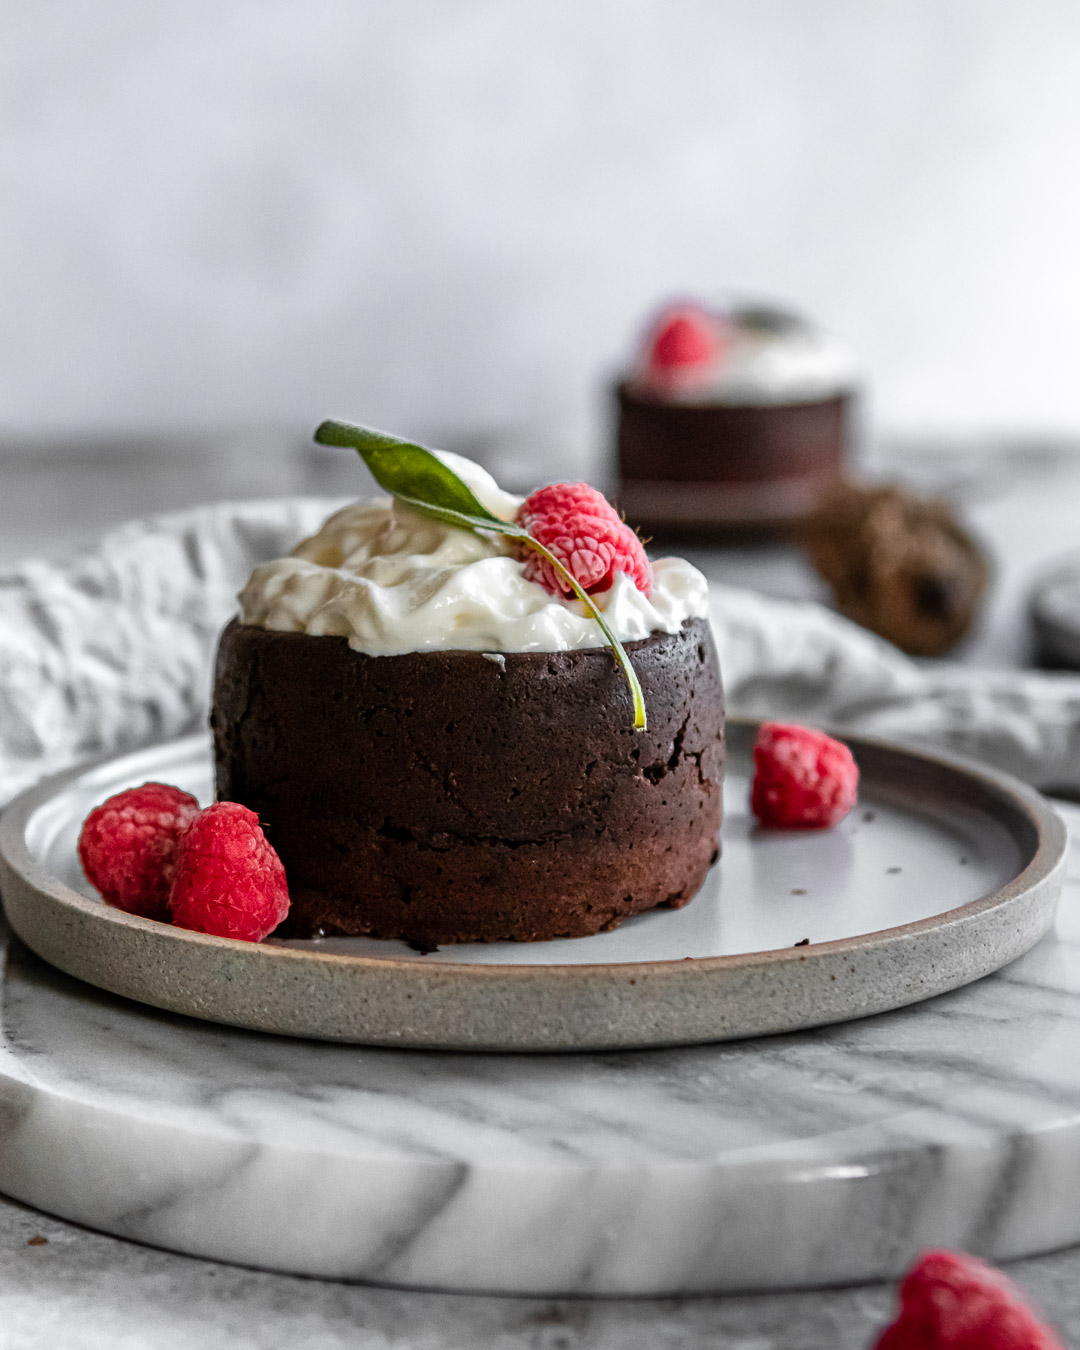 Chocolate Lava Cake with raspberries, and whipped cream